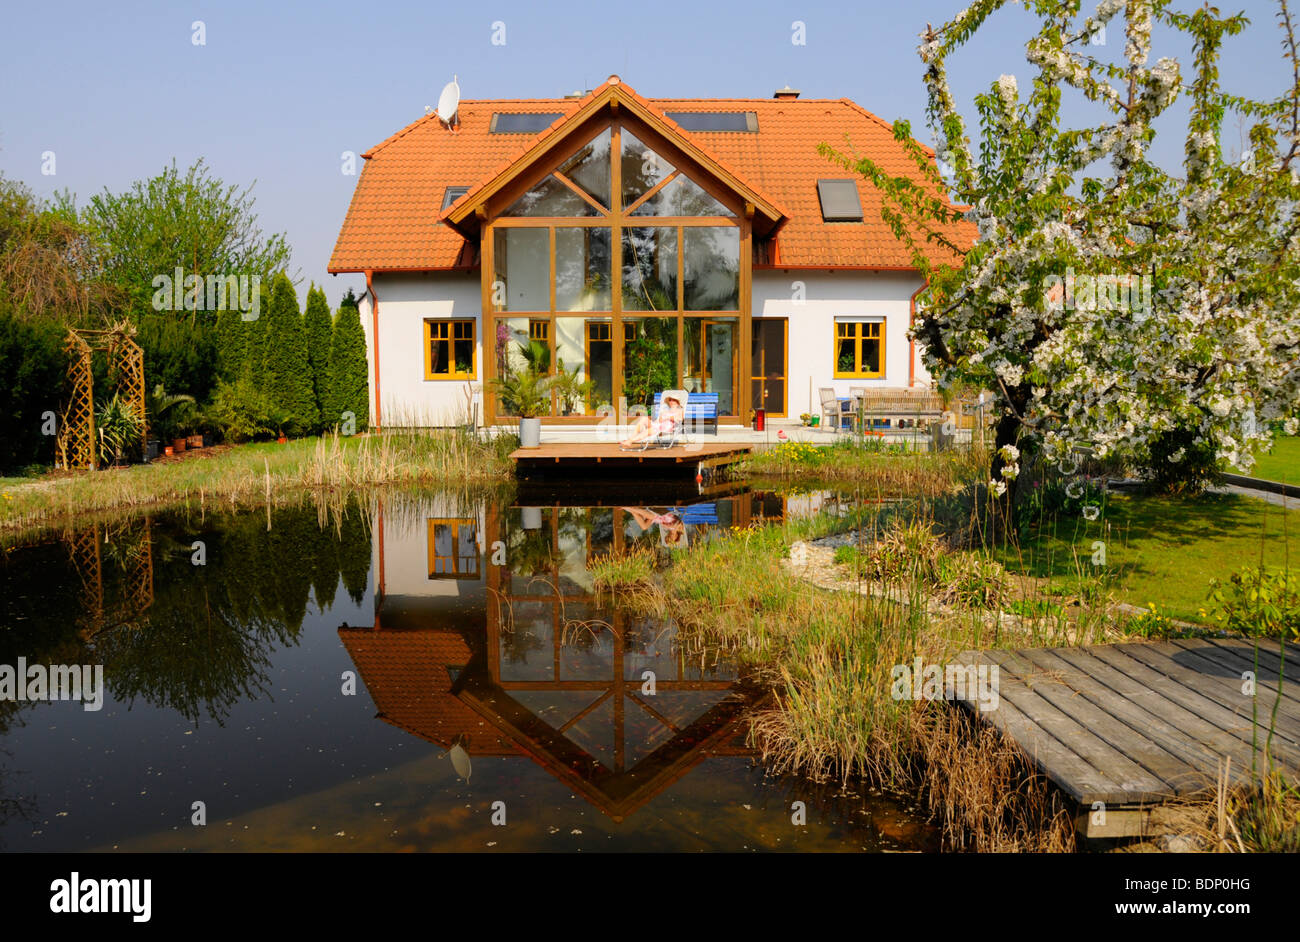 Garden pond in front of a house with conservatory and flowering cherry tree Stock Photo